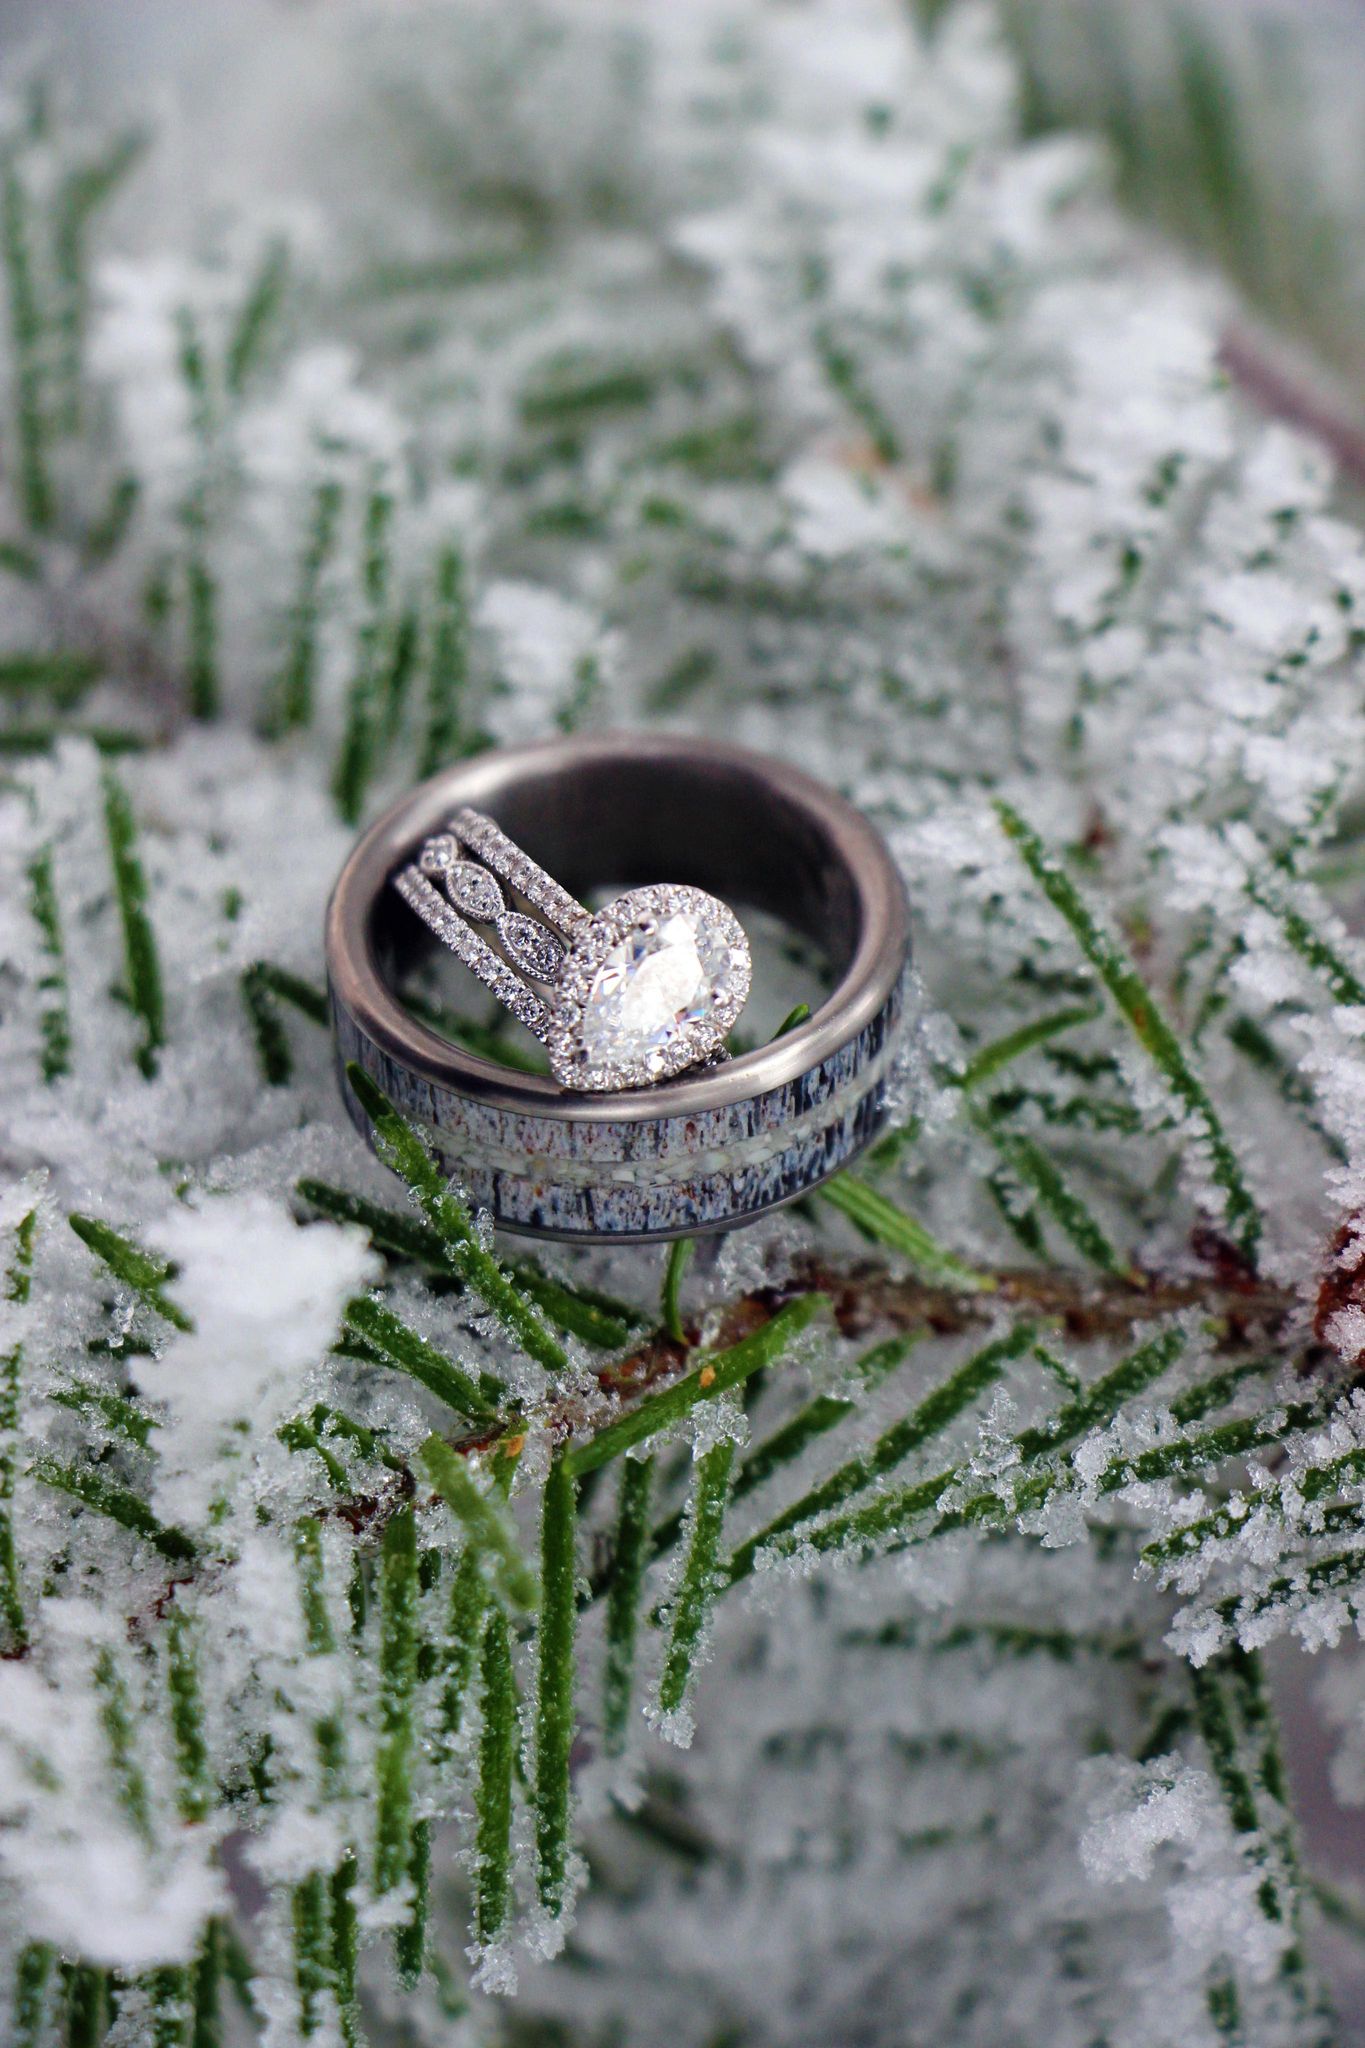 How to Make These Wedding Ring Picture Ideas | ShootProof Blog